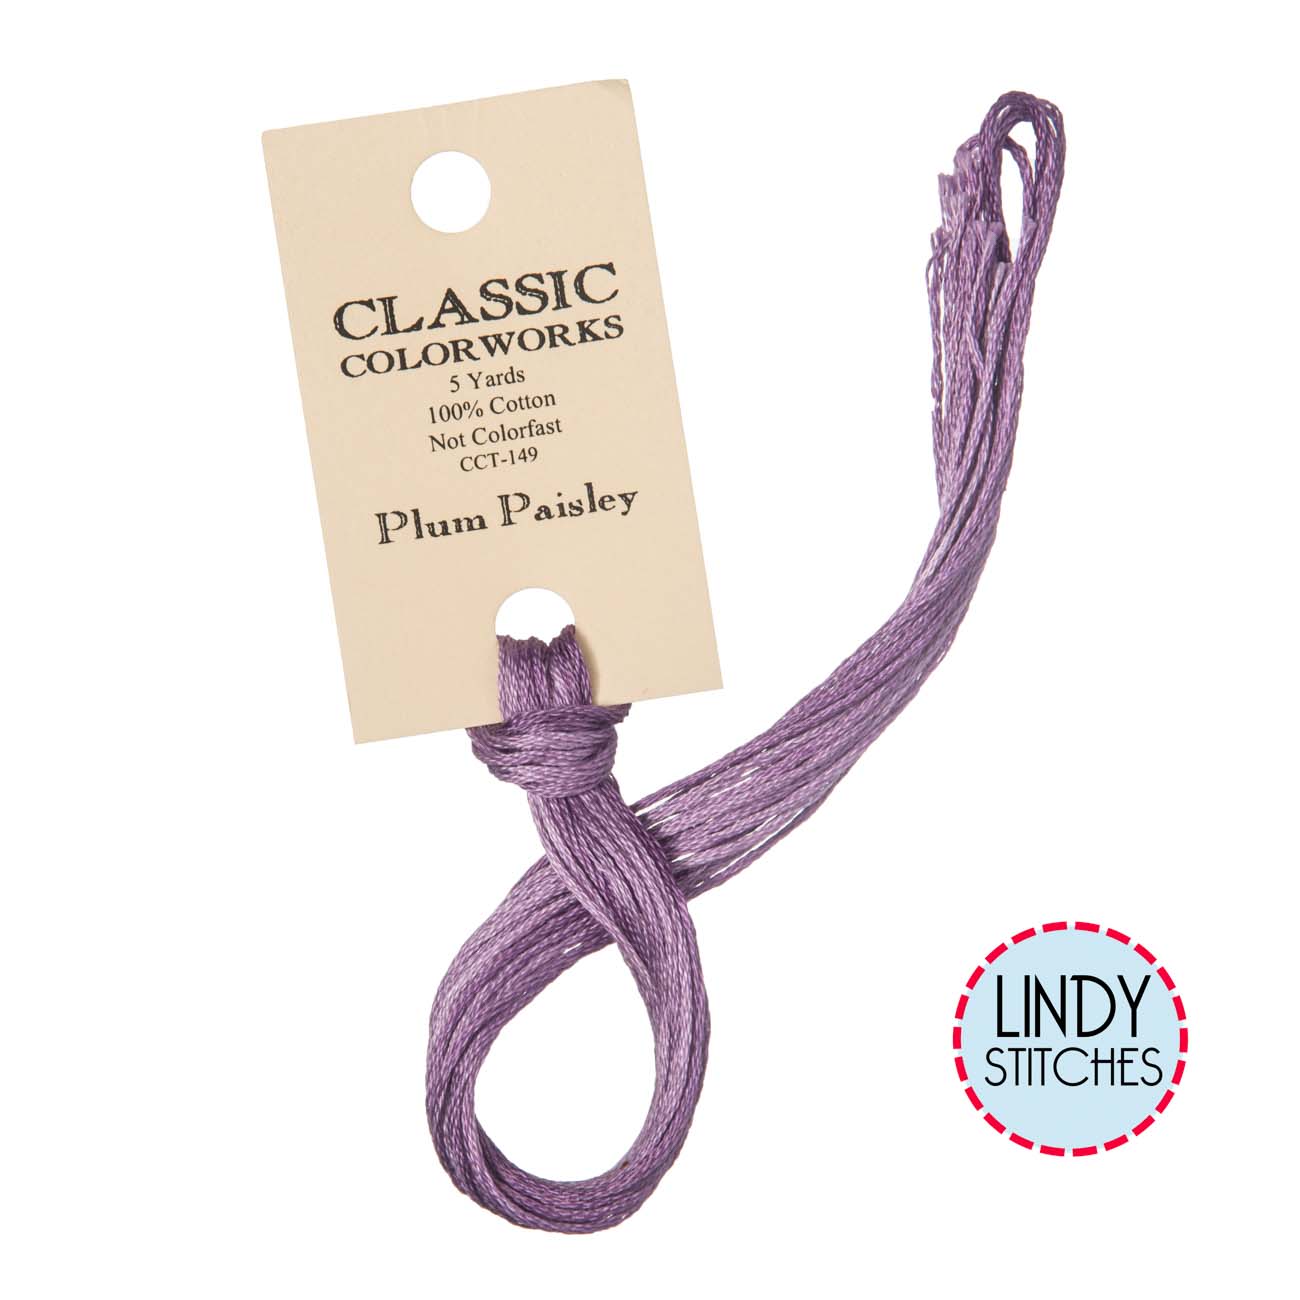 Plum Paisley Classic Colorworks Floss Hand Dyed Cotton Skein